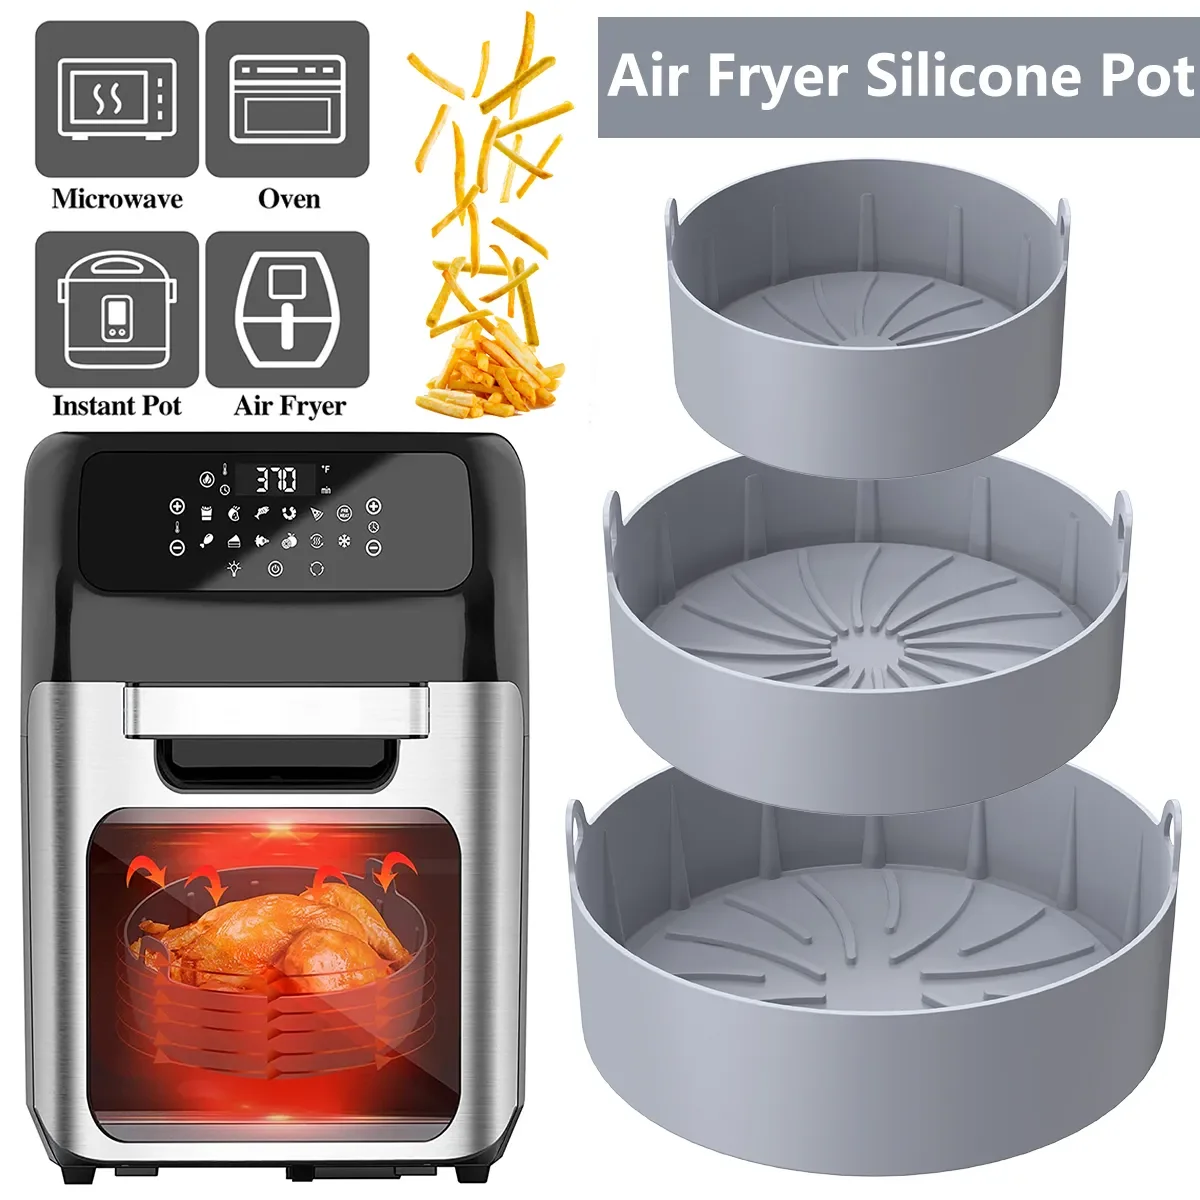 

Fryer Silicone Pot with Handle Reusable Air Fryers Oven Baking Tray Basket Mat Replacemen Grill Pan Kitchen Accessories